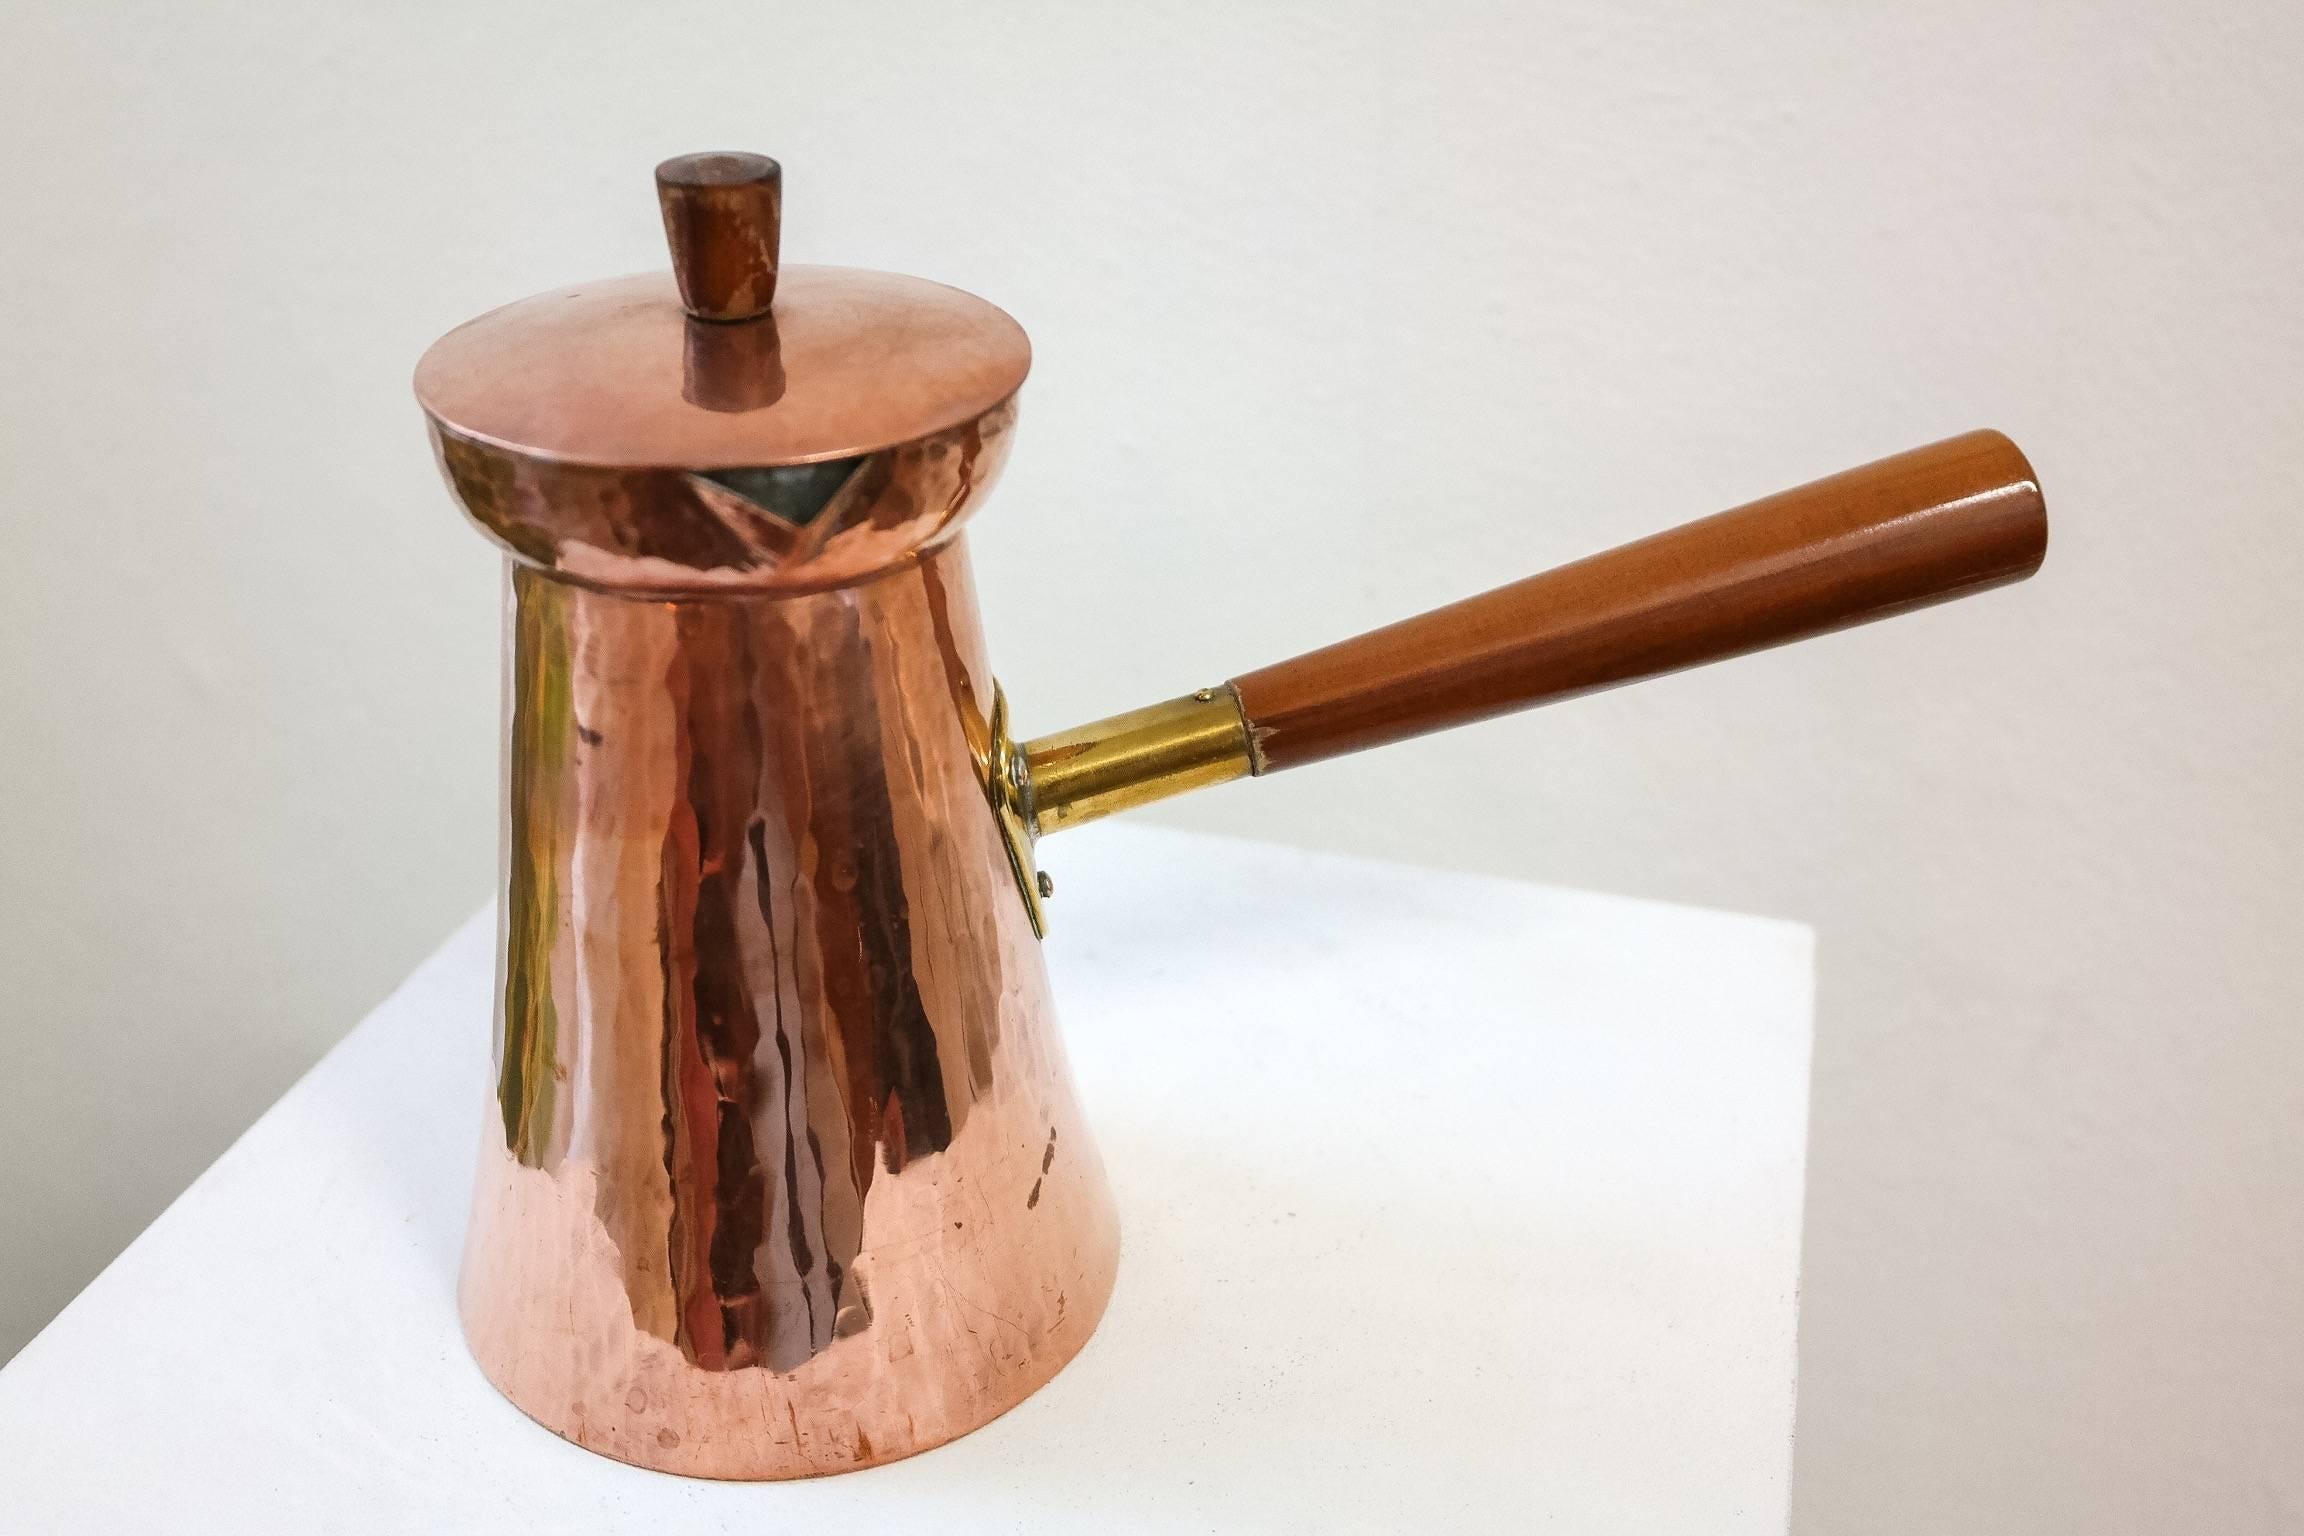 This coffee pot is made of copper and is tinned from the inside. Created by Karl Raichle, this object has the original hallmark on the bottom.